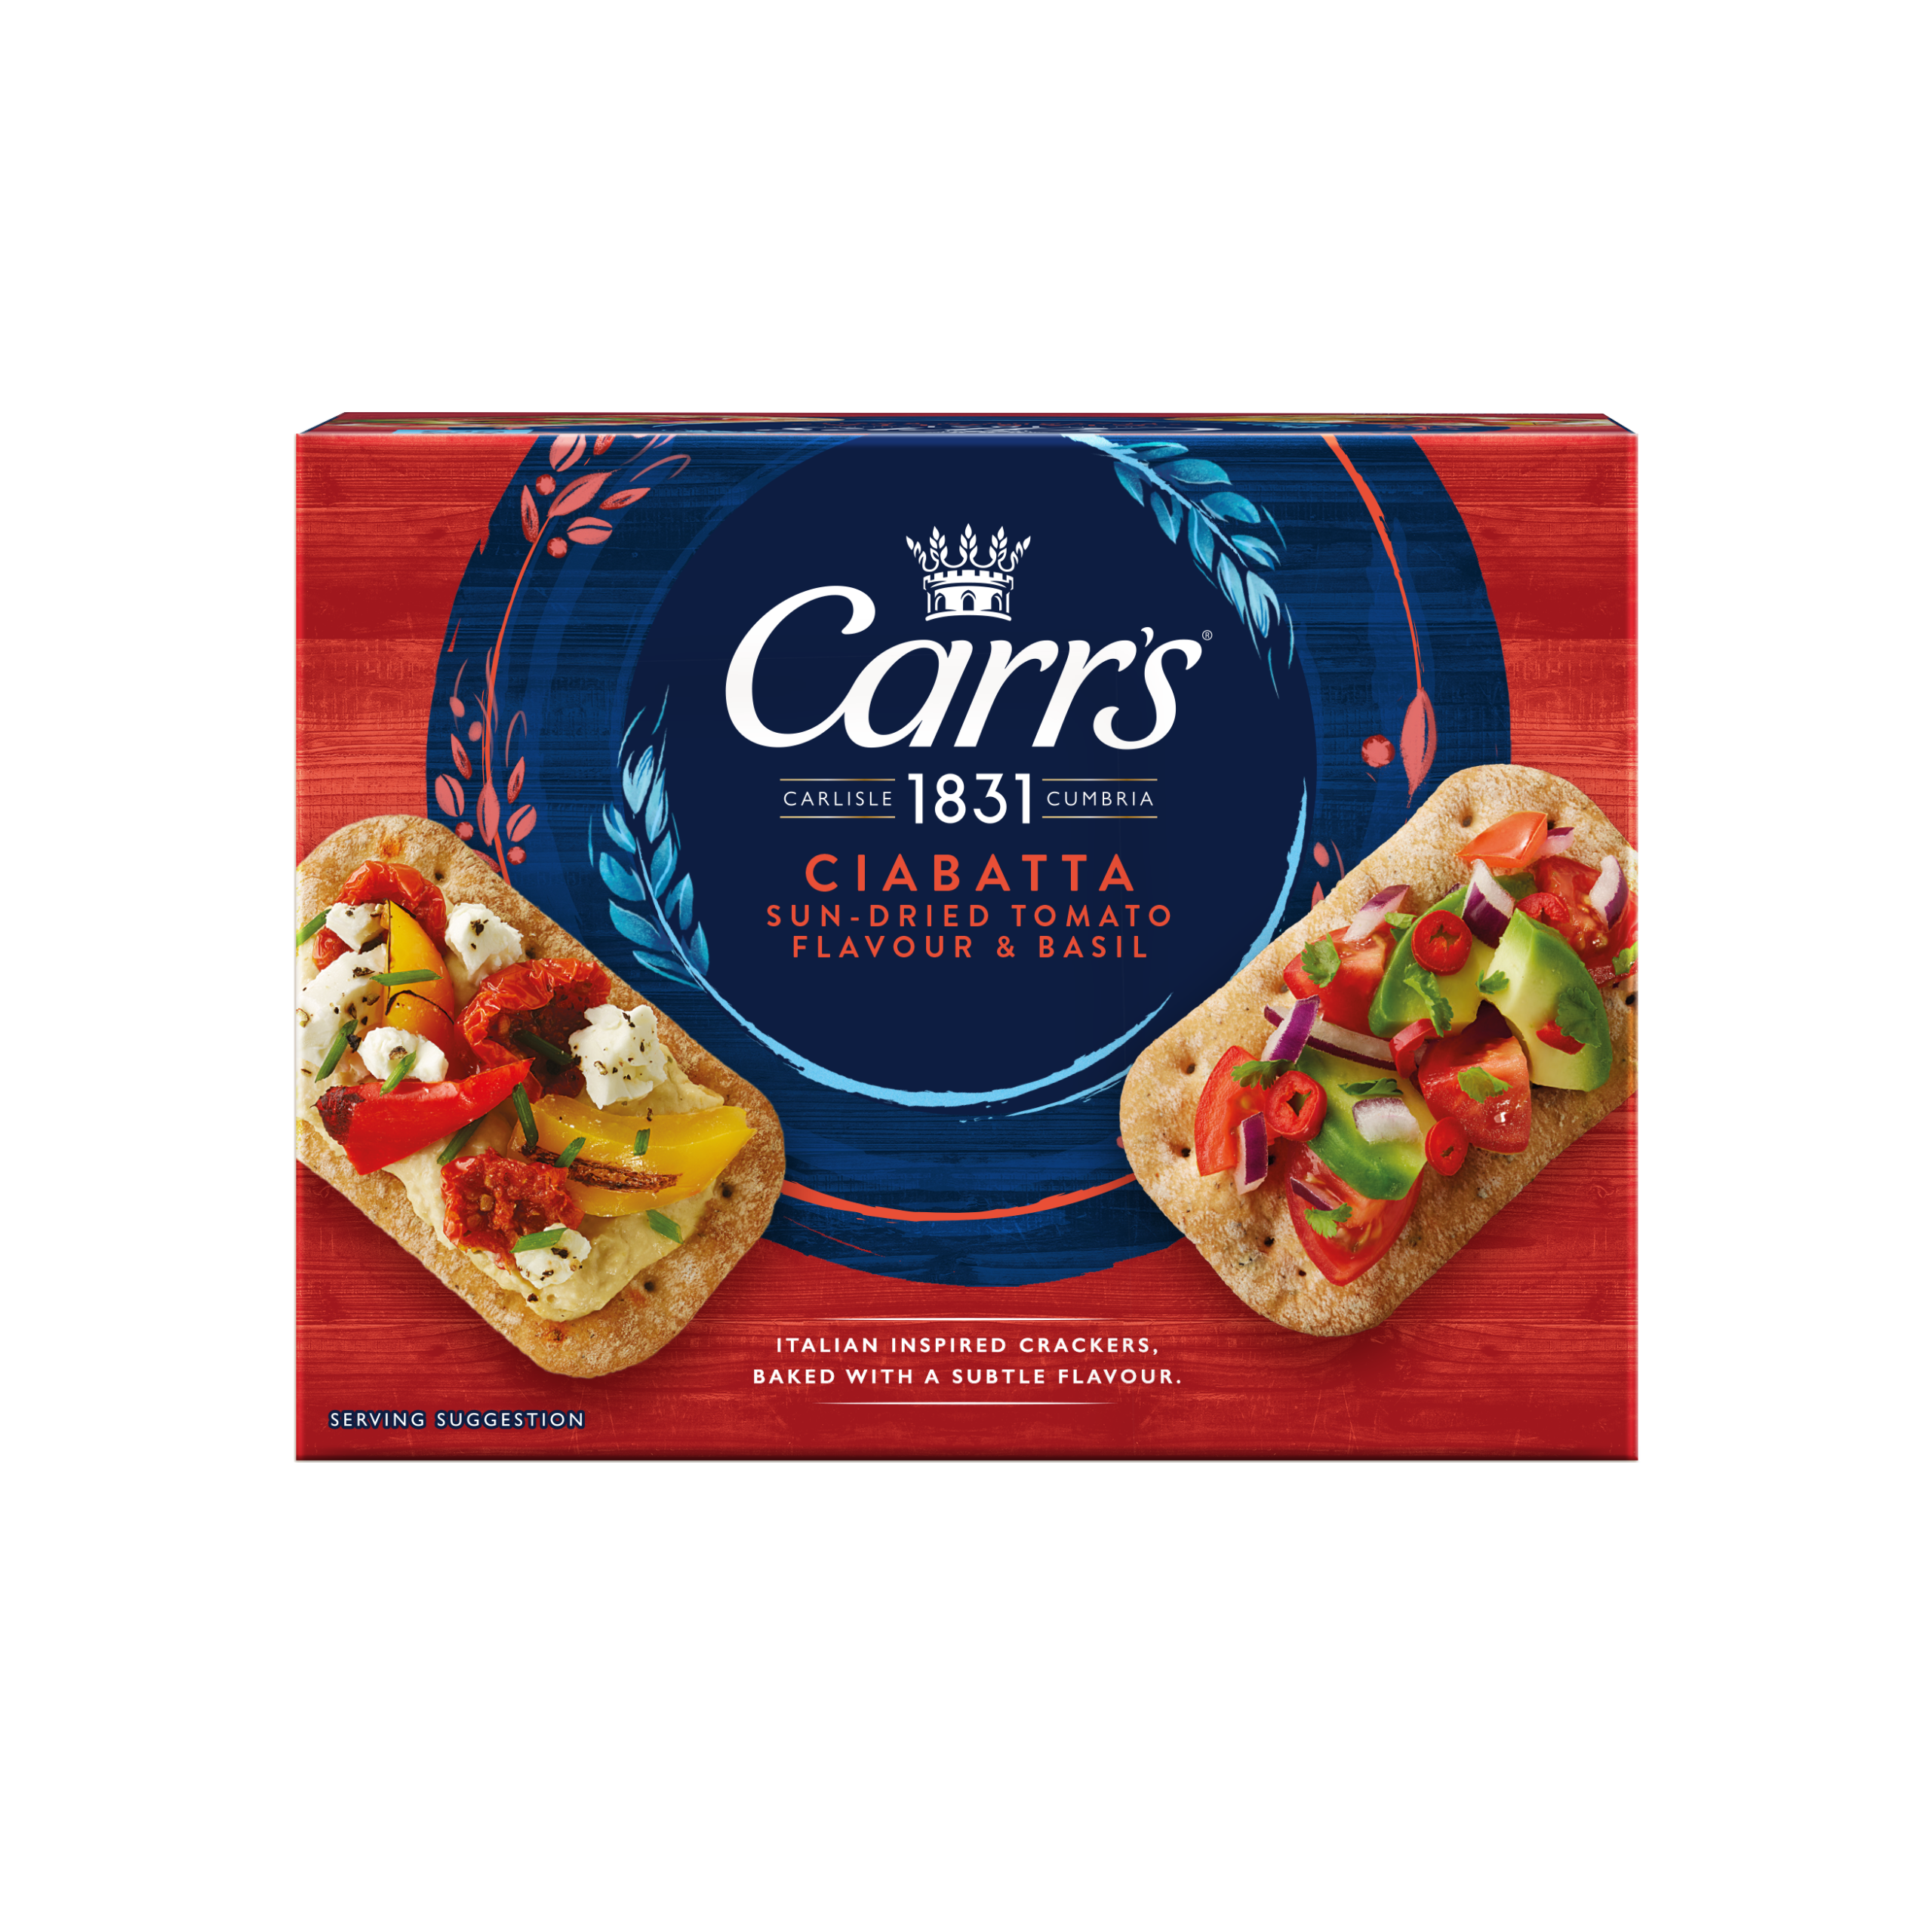 pladis celebrates heritage of Carr’s brand with relaunch and campaign